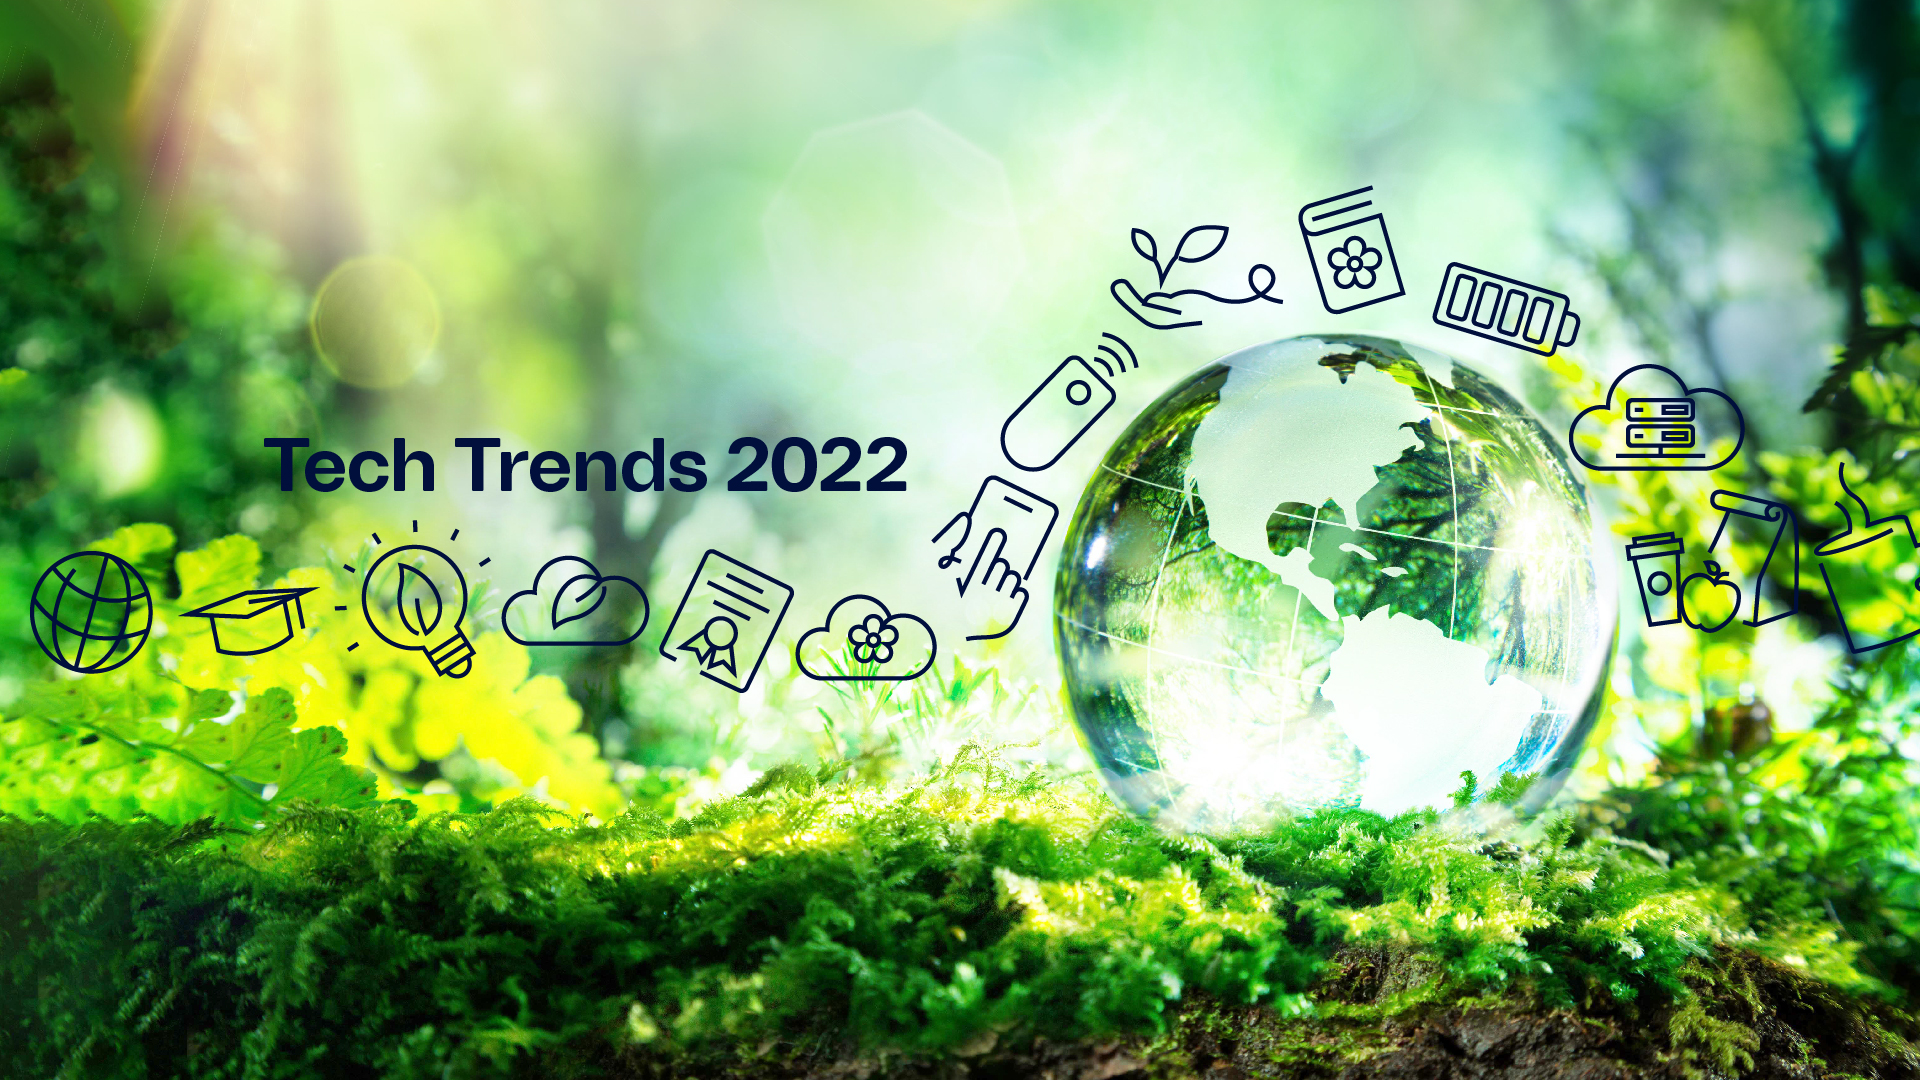 Telenor: 5 tech trends that will fuel the green transition